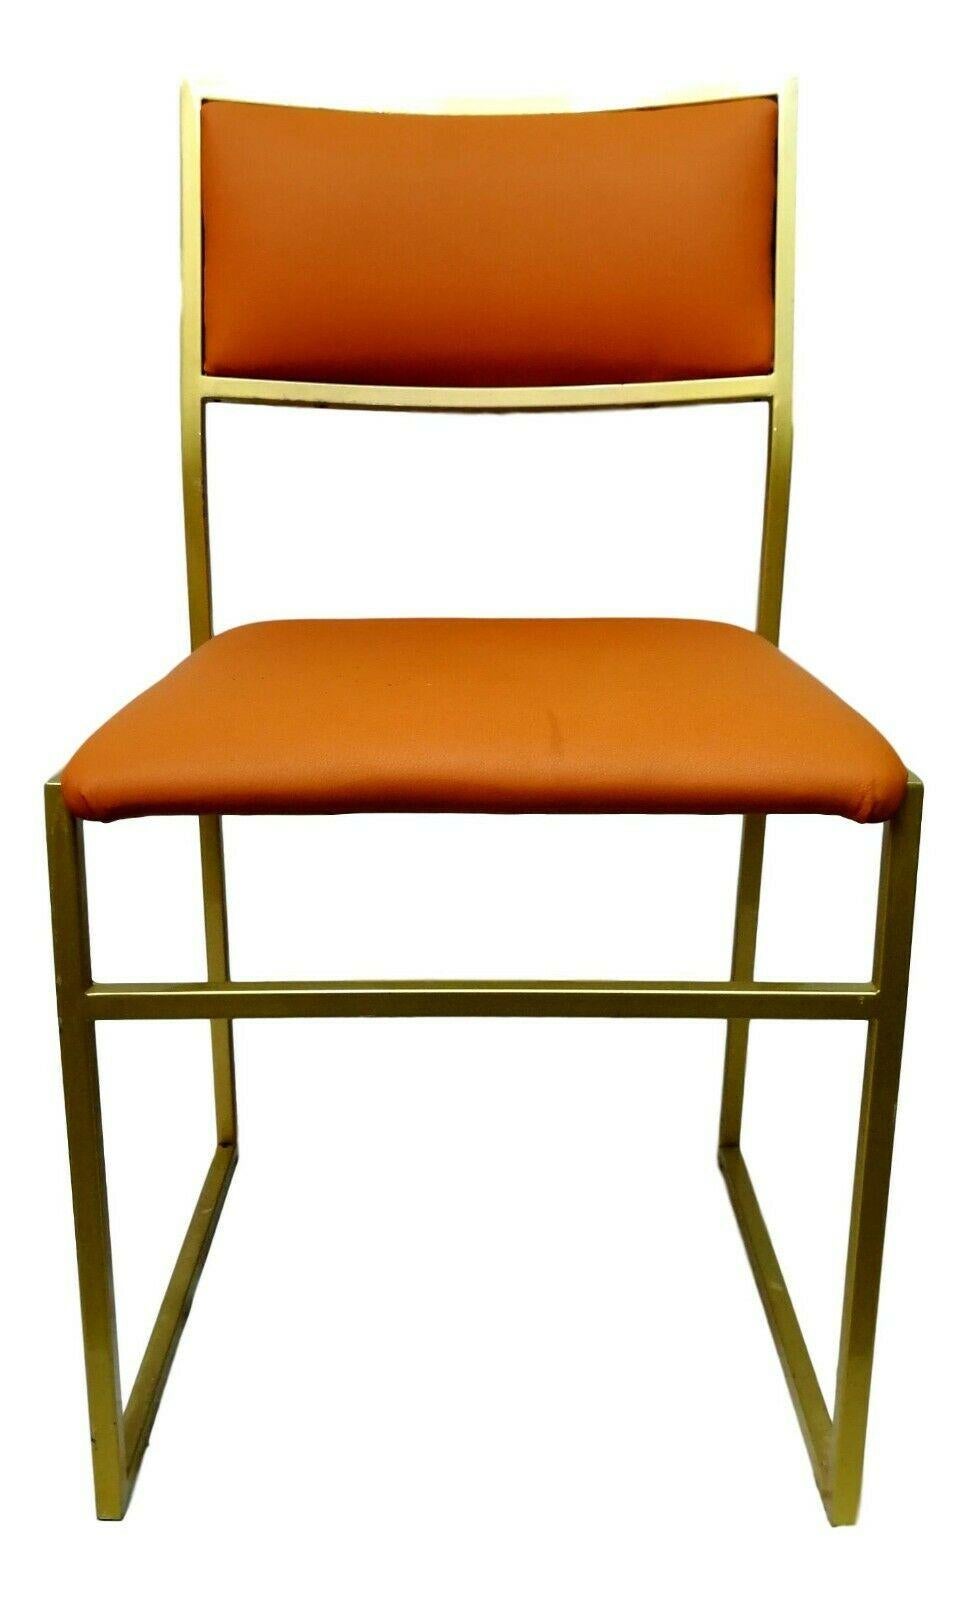 Lot of Six Collectible Coloured Chairs in Gold Metal, 1970s For Sale 7